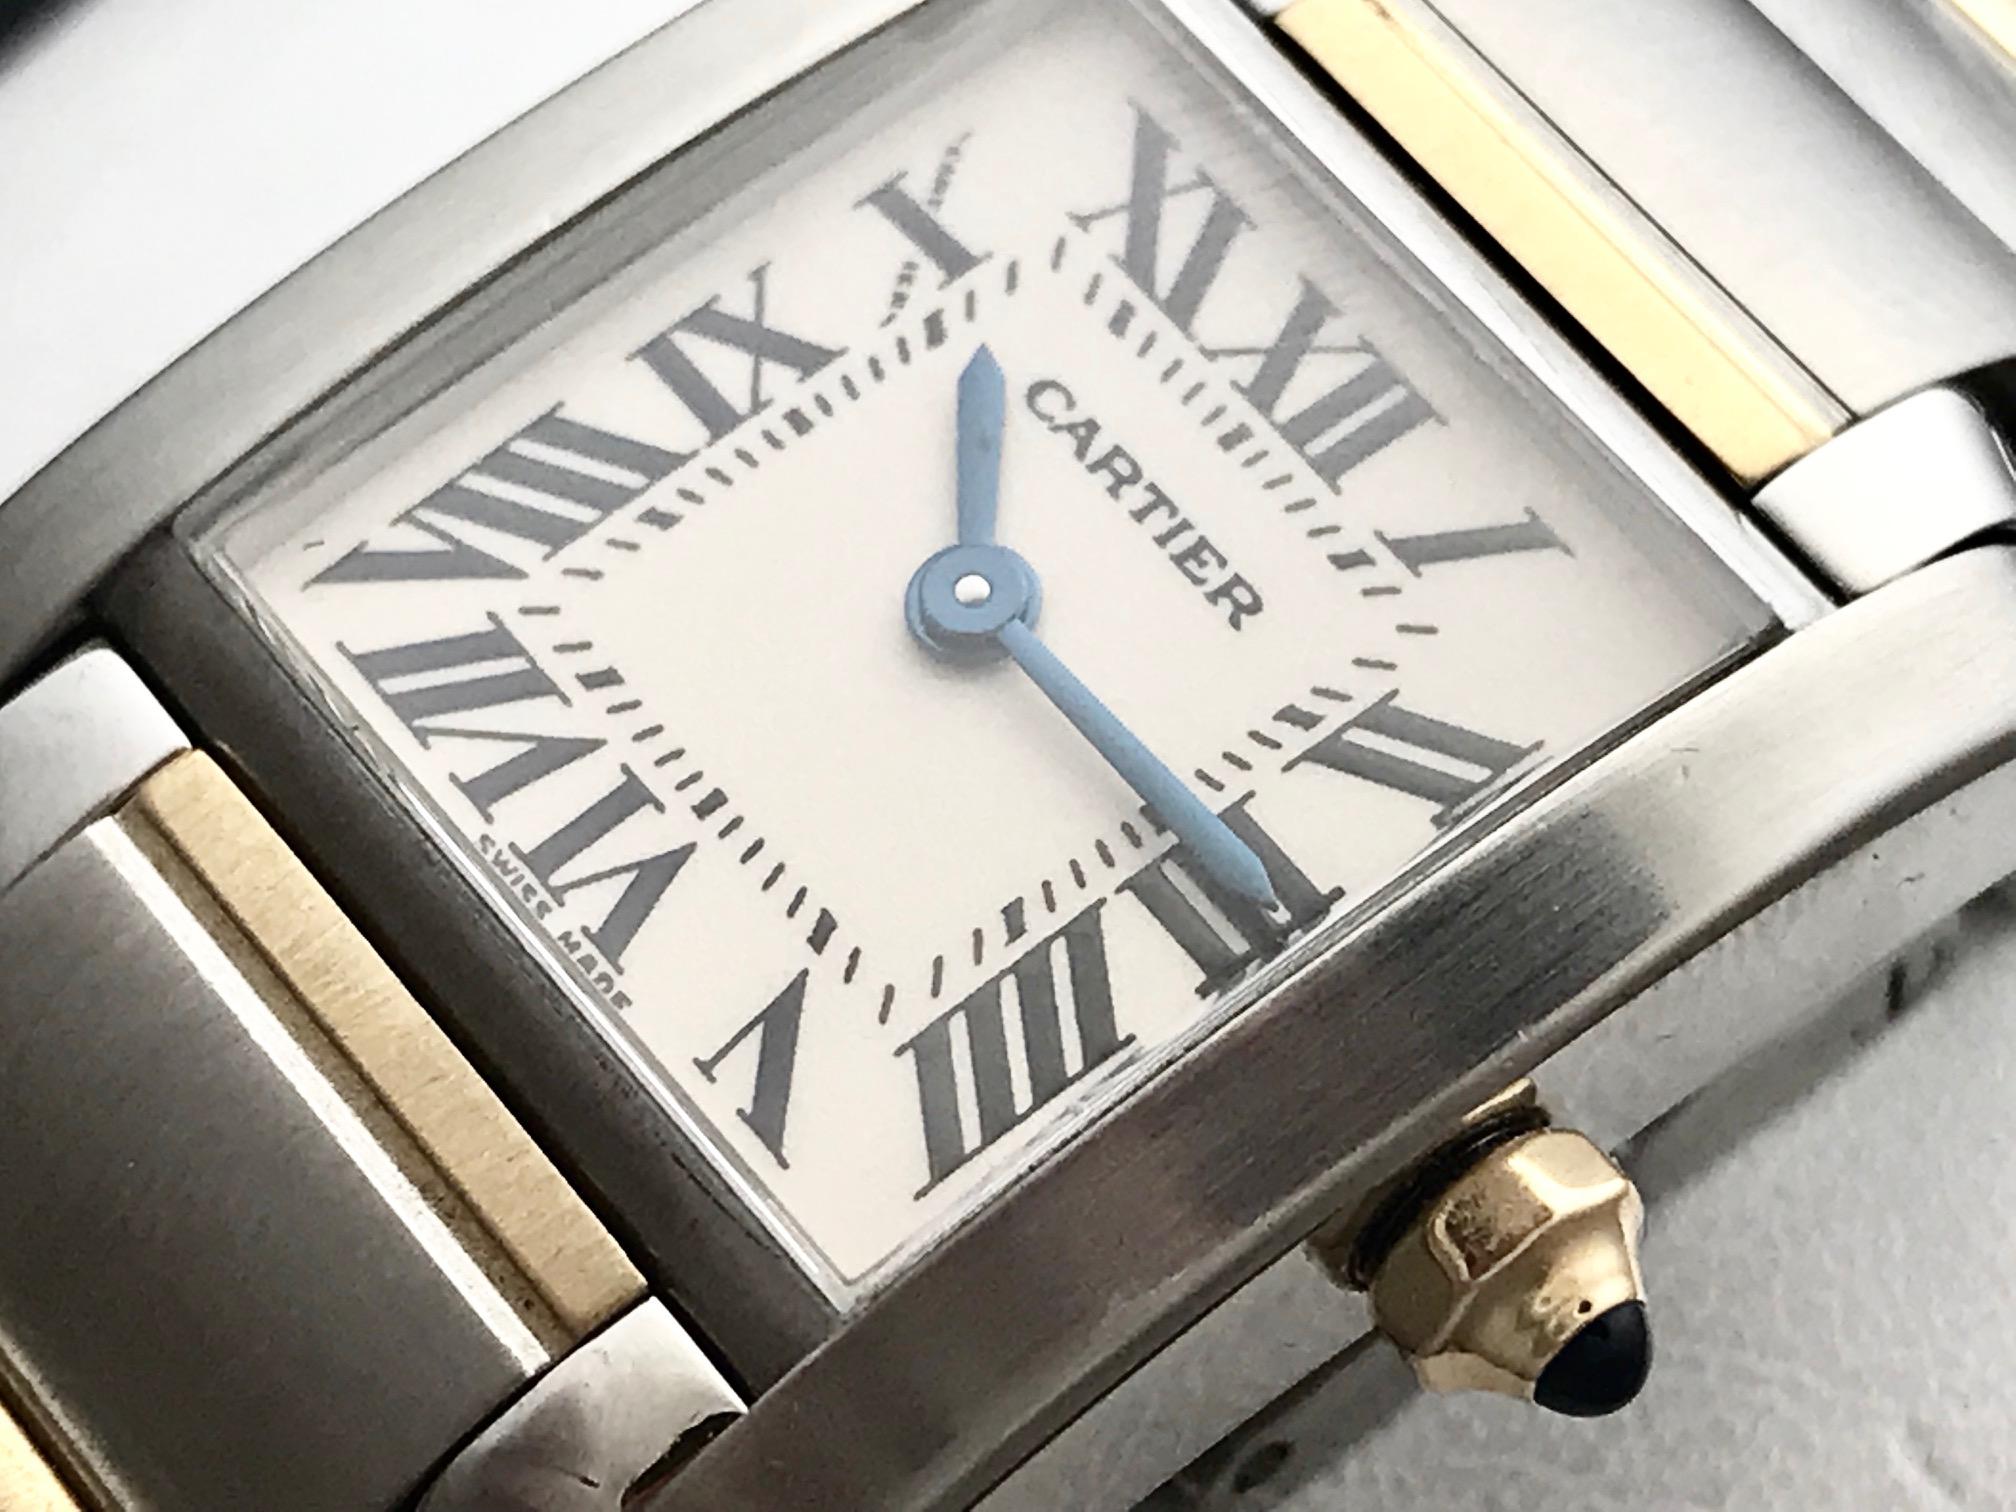 This beautiful Cartier Tank Francaise features a stainless steel square style case, and a two-tone bracelet made of stainless steel and 18k yellow gold. The white dial has black Roman numerals and wonderfully blued hour and minute hands. This watch